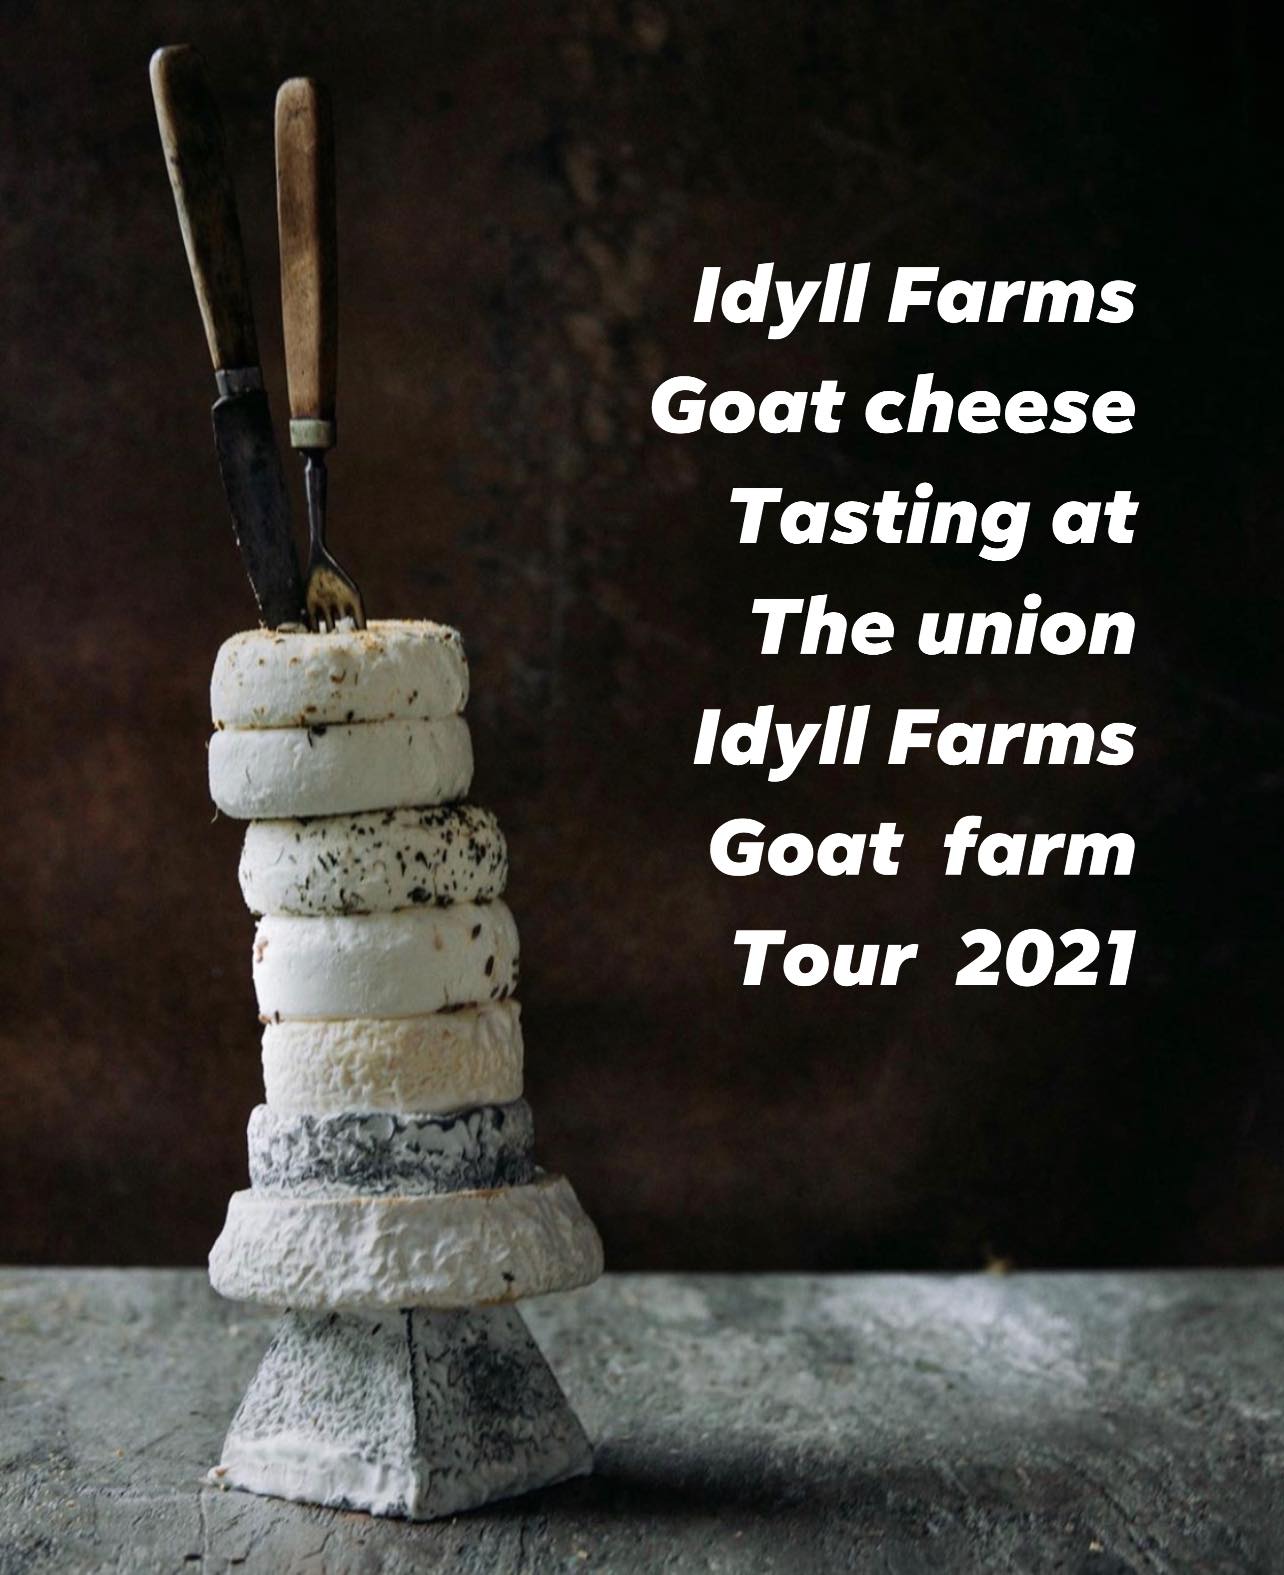 Idyll Farms Goat Cheese Tasting at The Union! Idyll Farms Goat